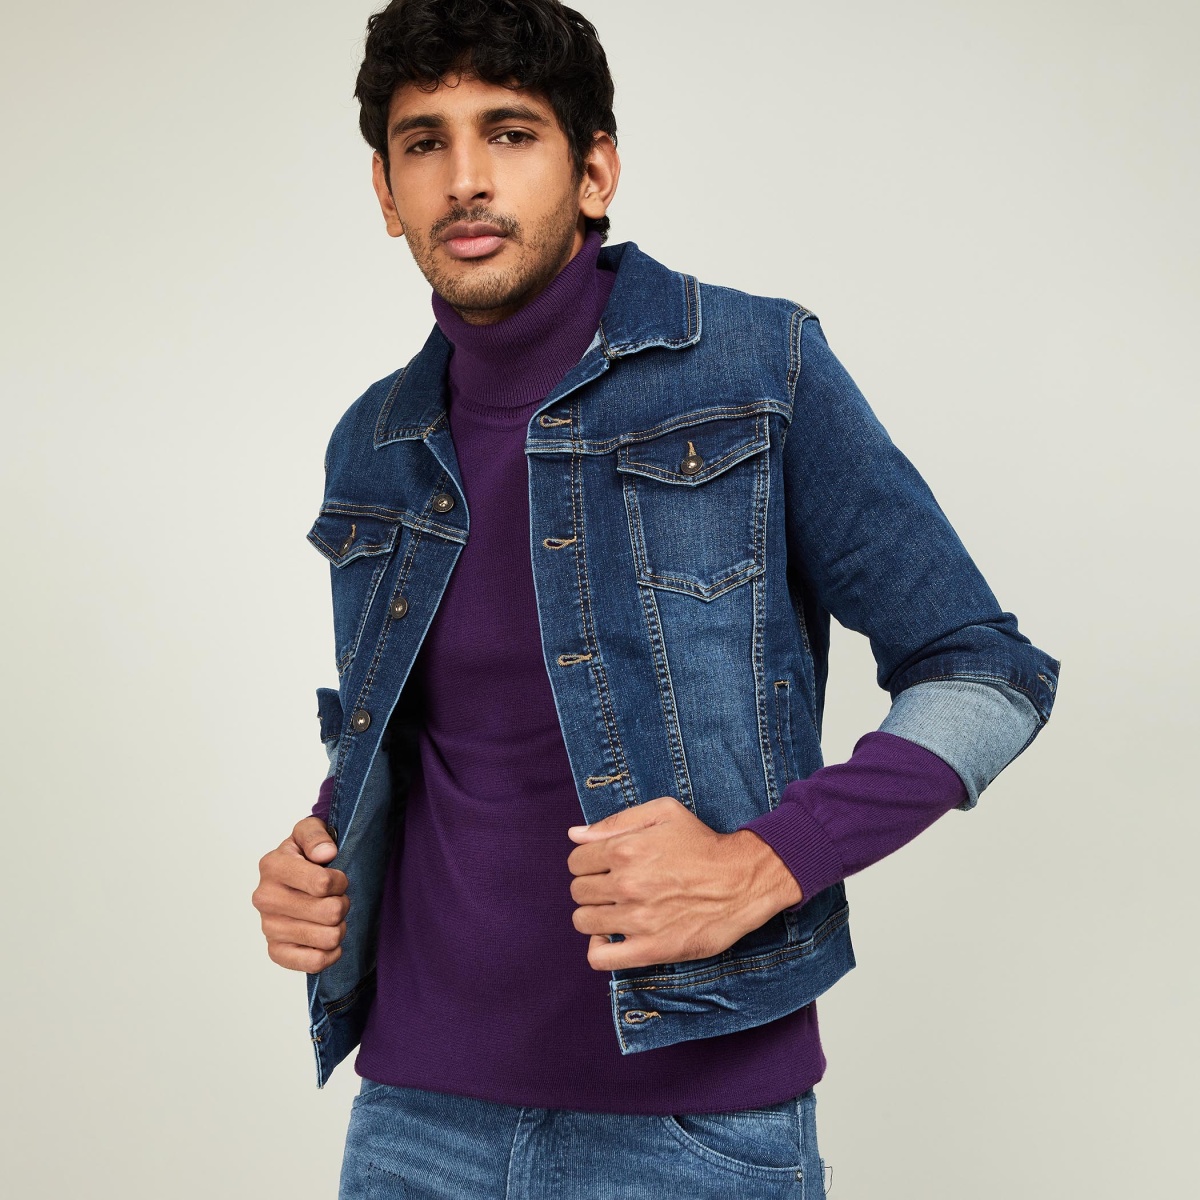 Buy Genuine Pepe Jeans Jackets Online At Best Prices-mncb.edu.vn